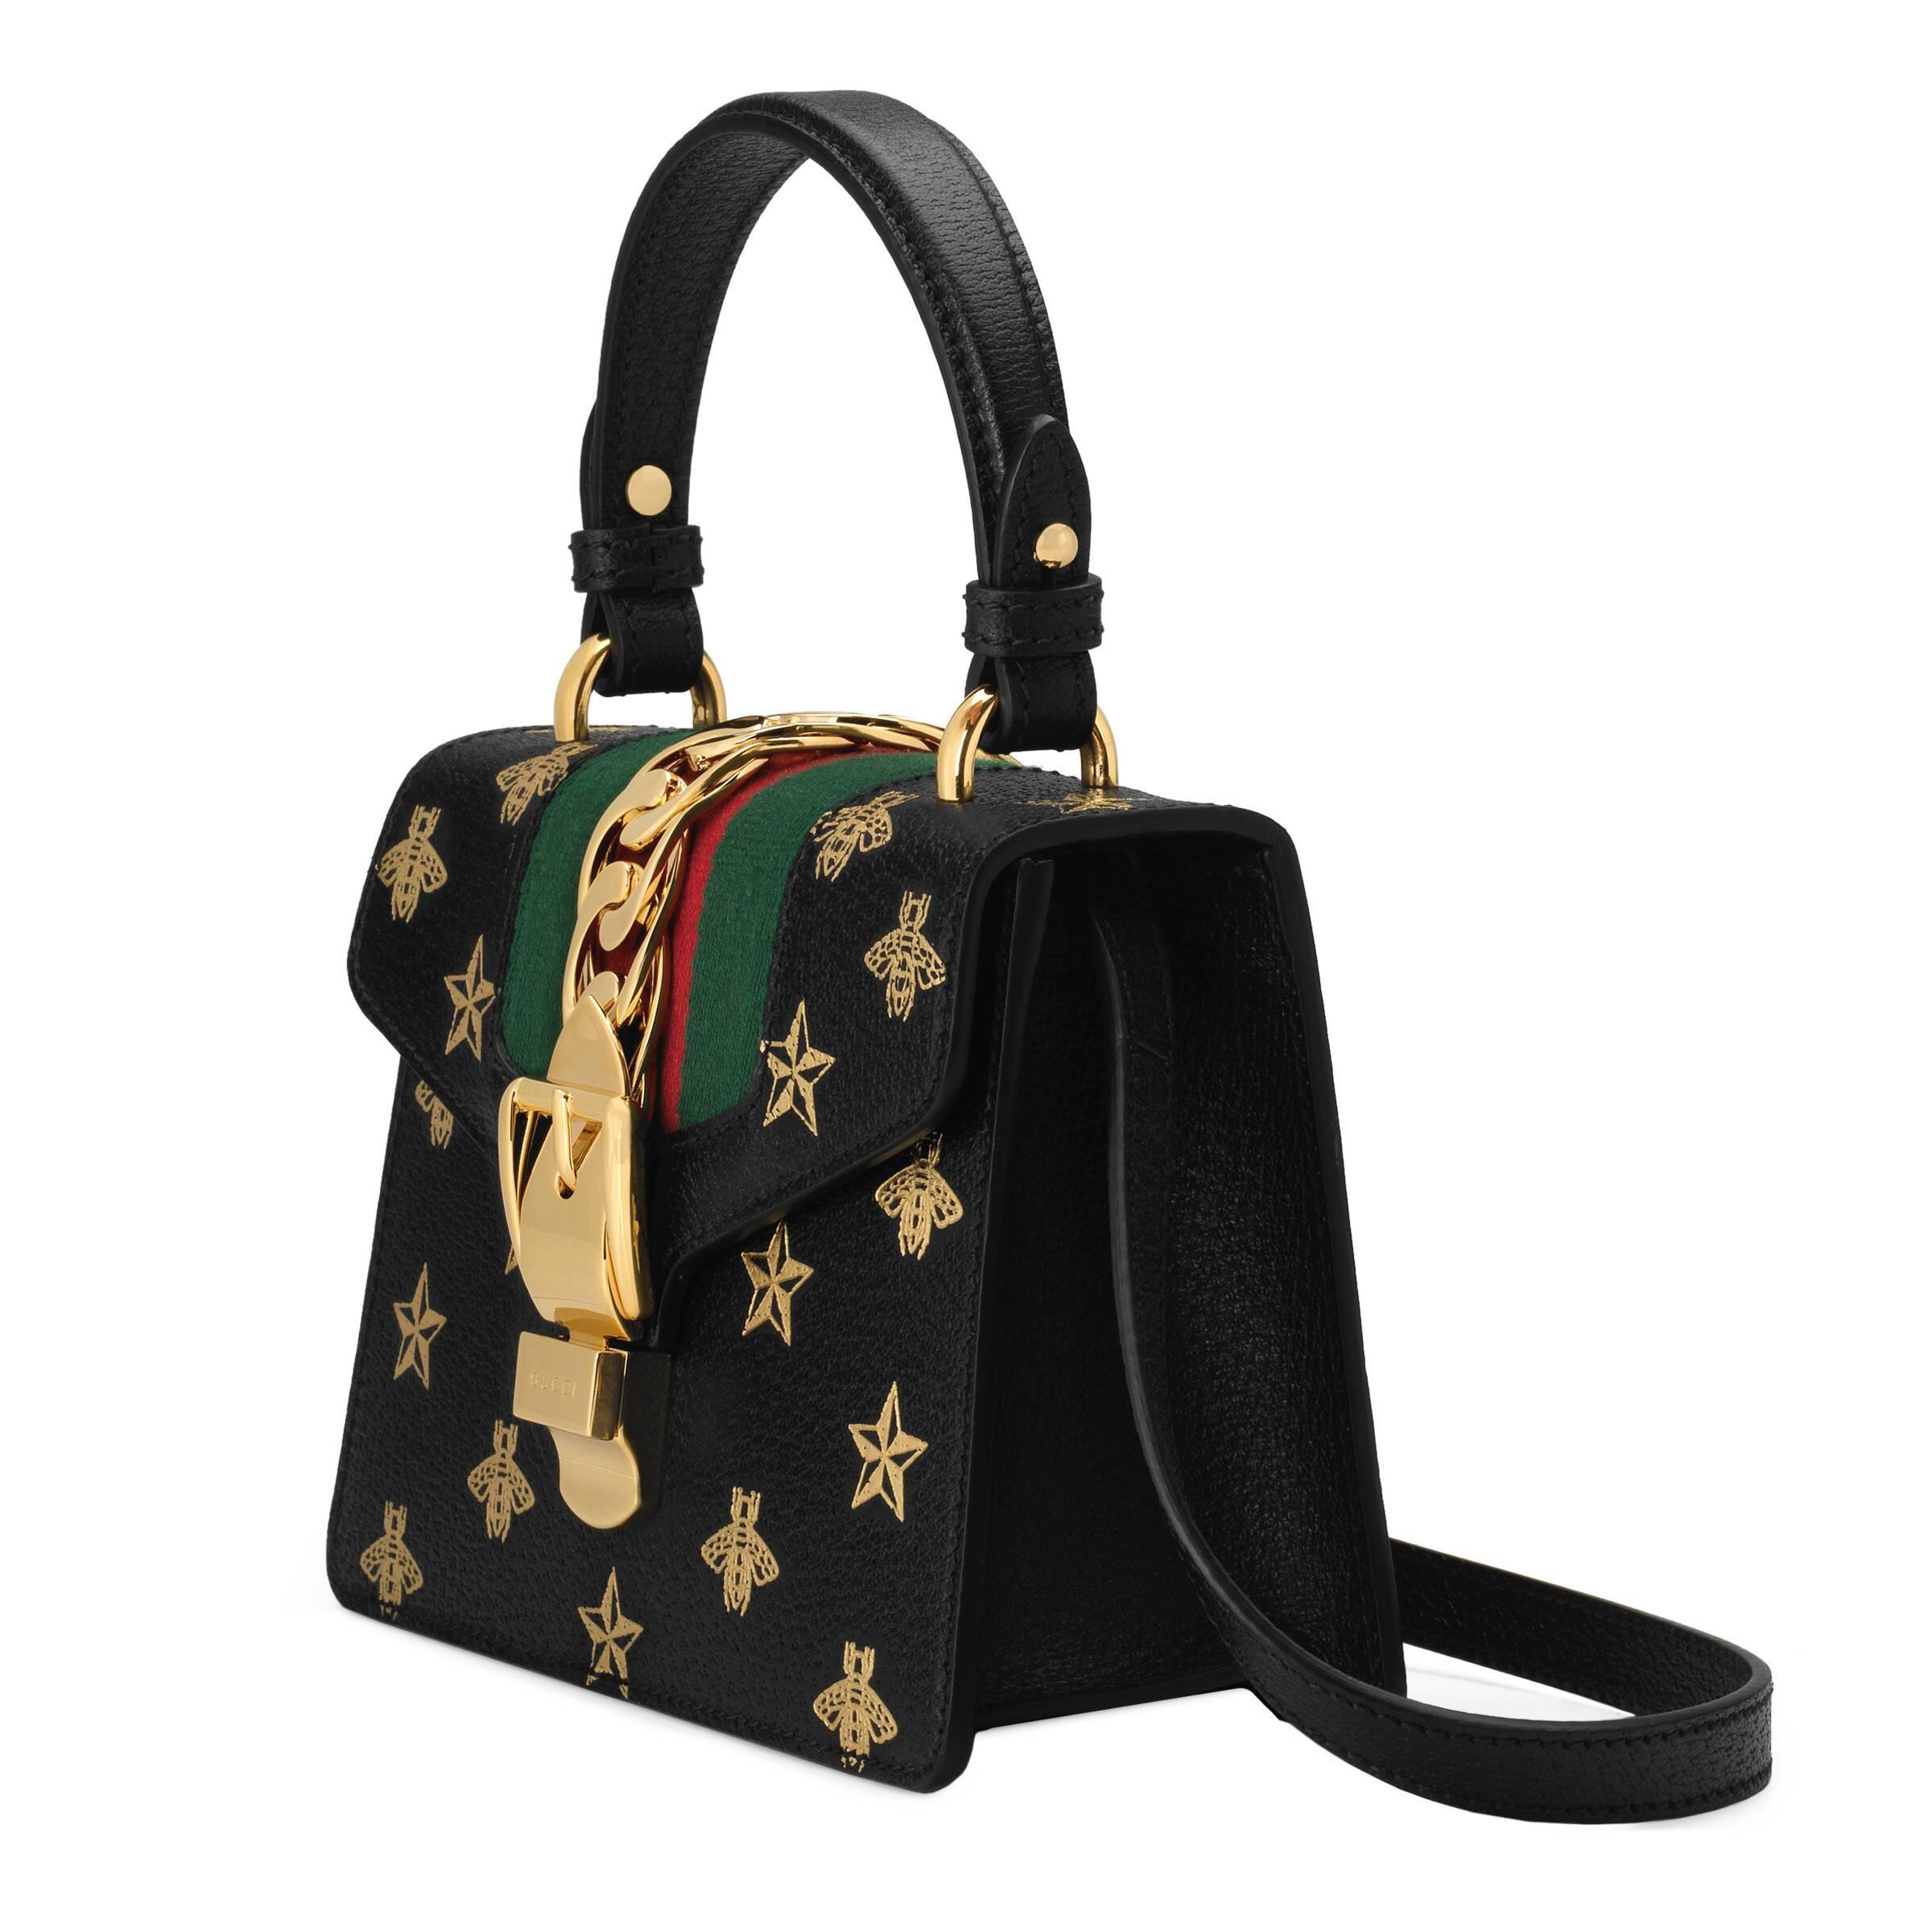 Auth Gucci Sylvie bee and star Crossbody Shoulder Bag Black/Gold Leather  e54452g